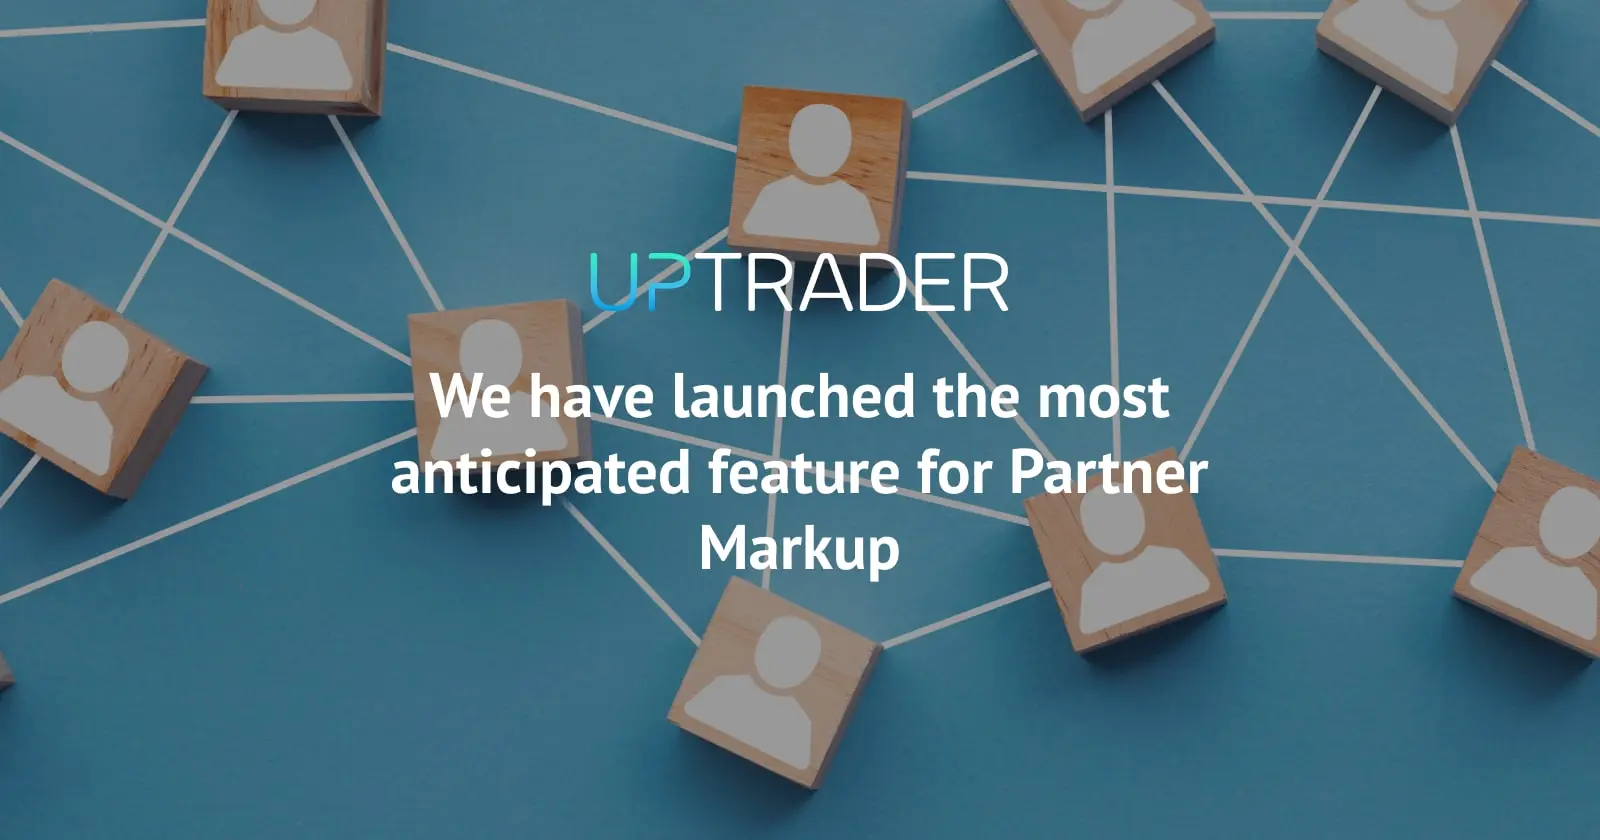 We have launched the most anticipated feature for Partner Markup